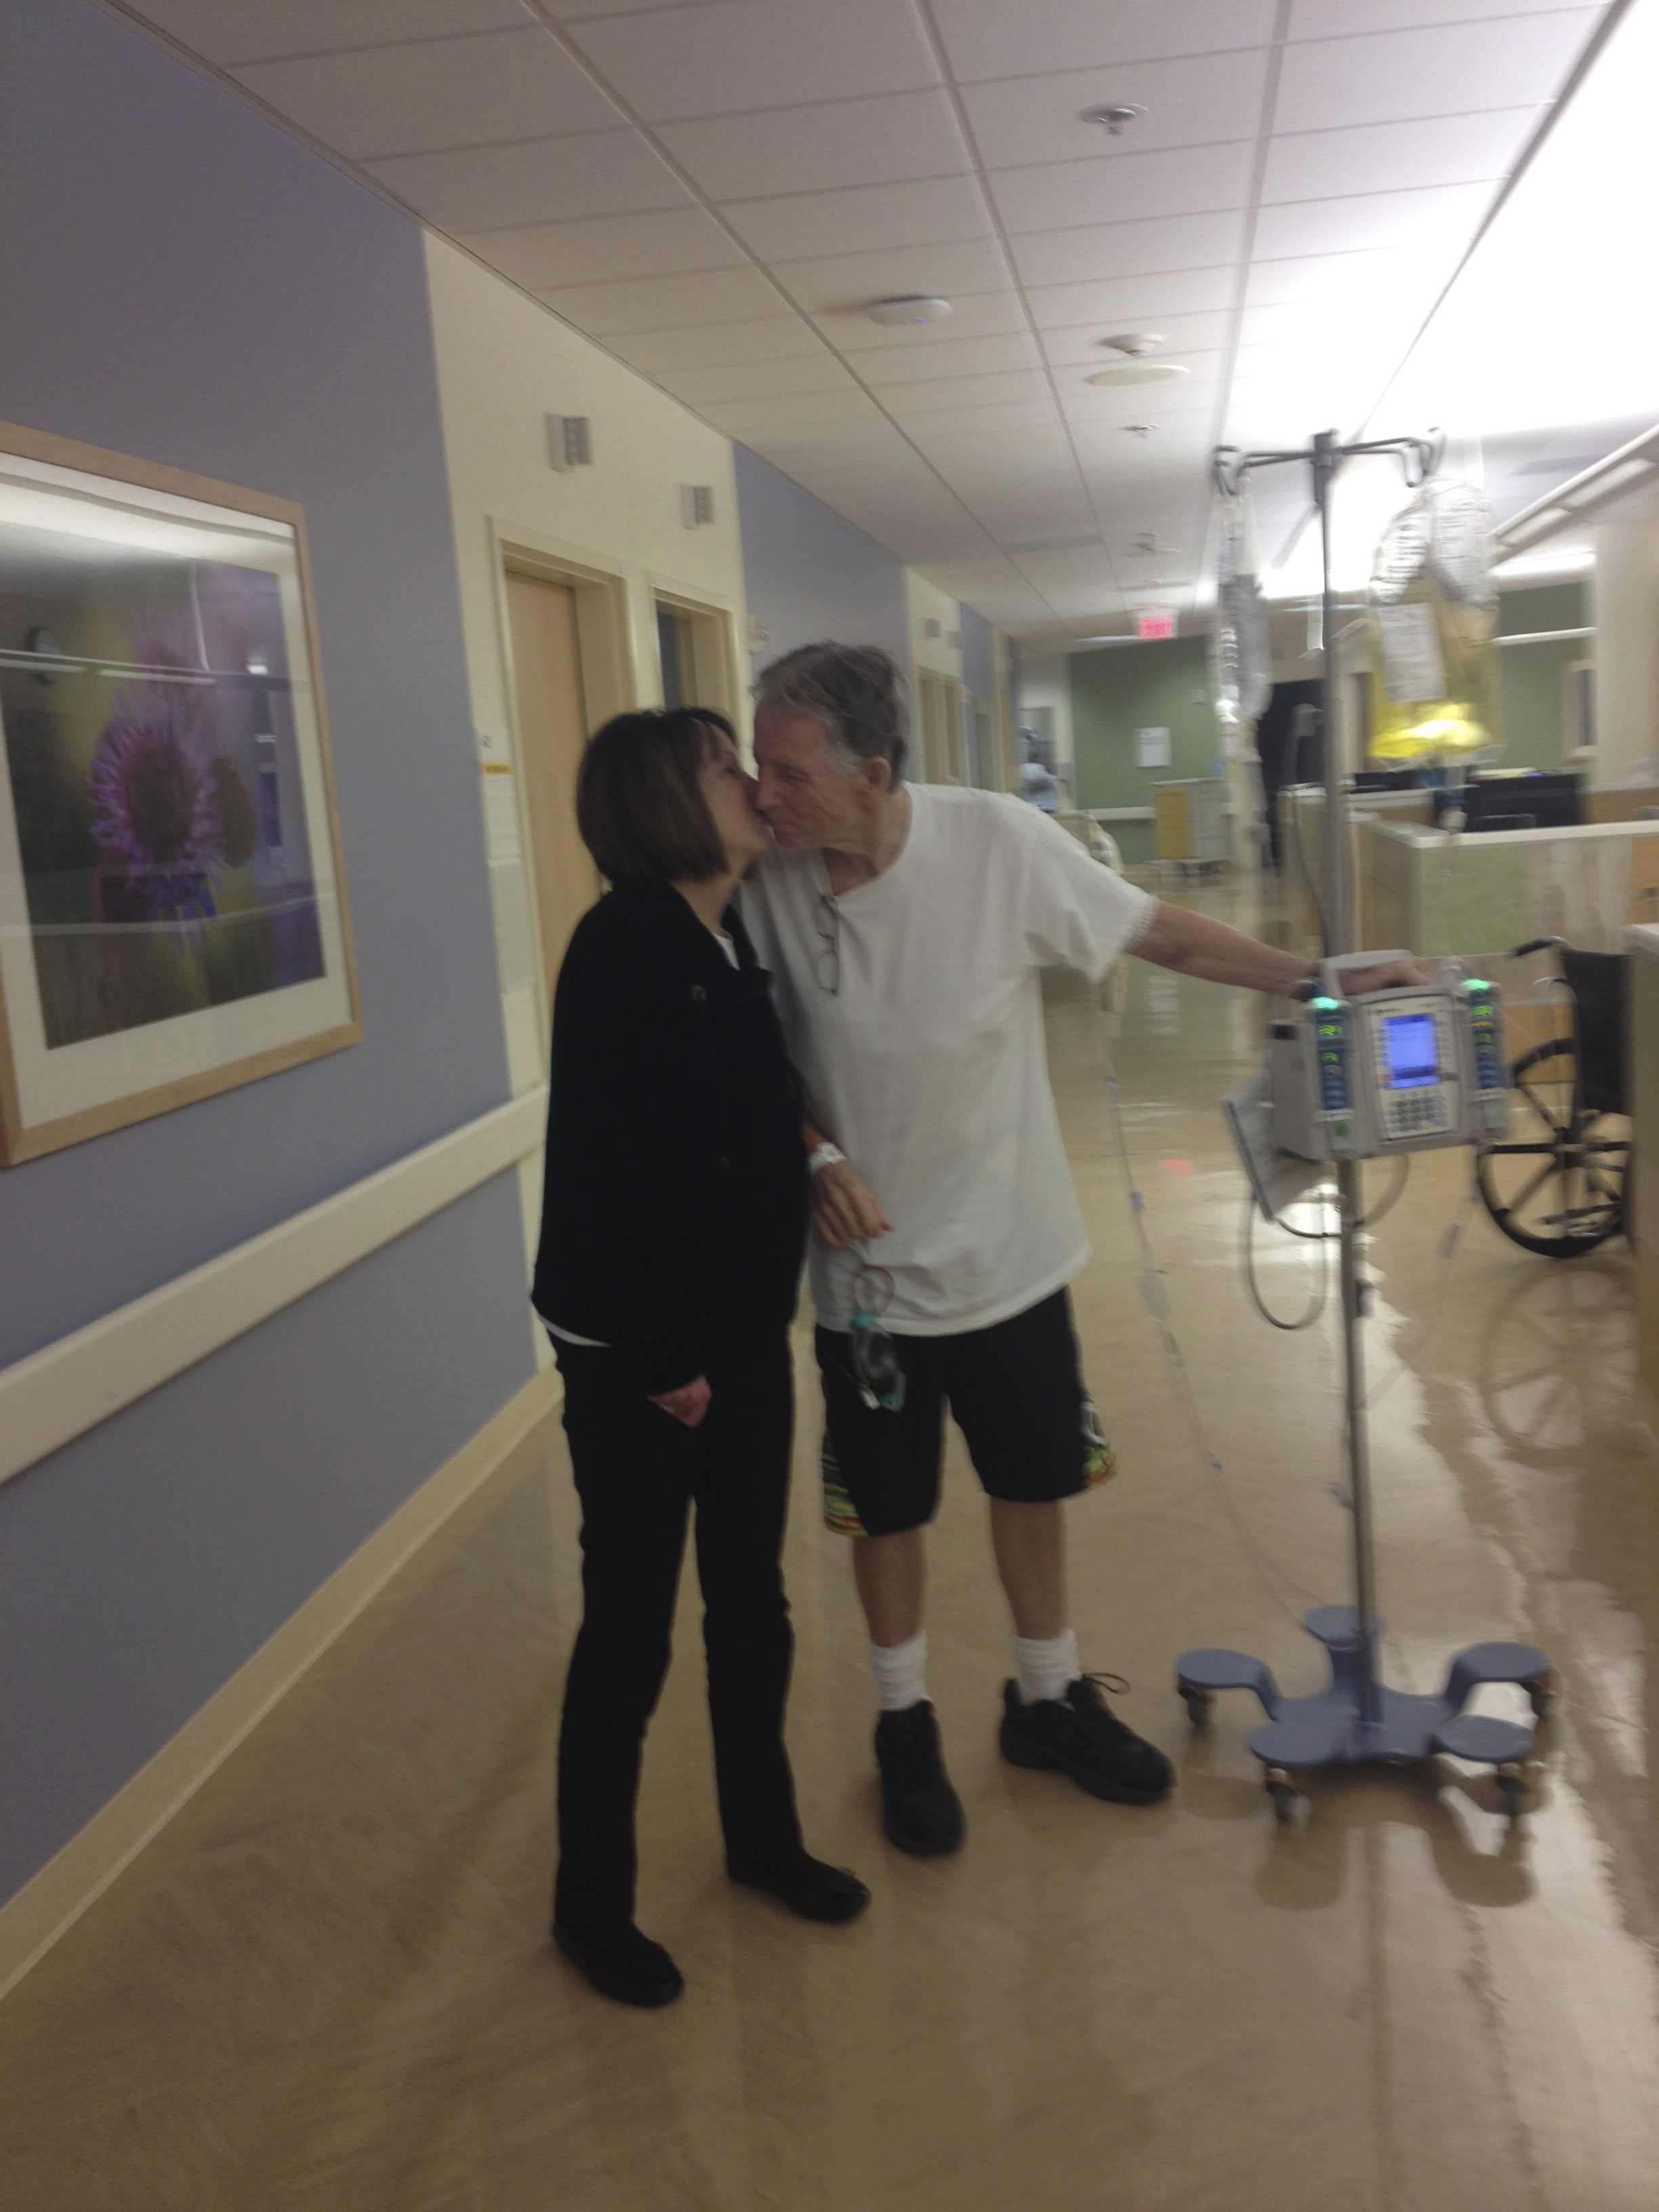 Phil and Cheryl take a moment to steal a kiss in the hospital.